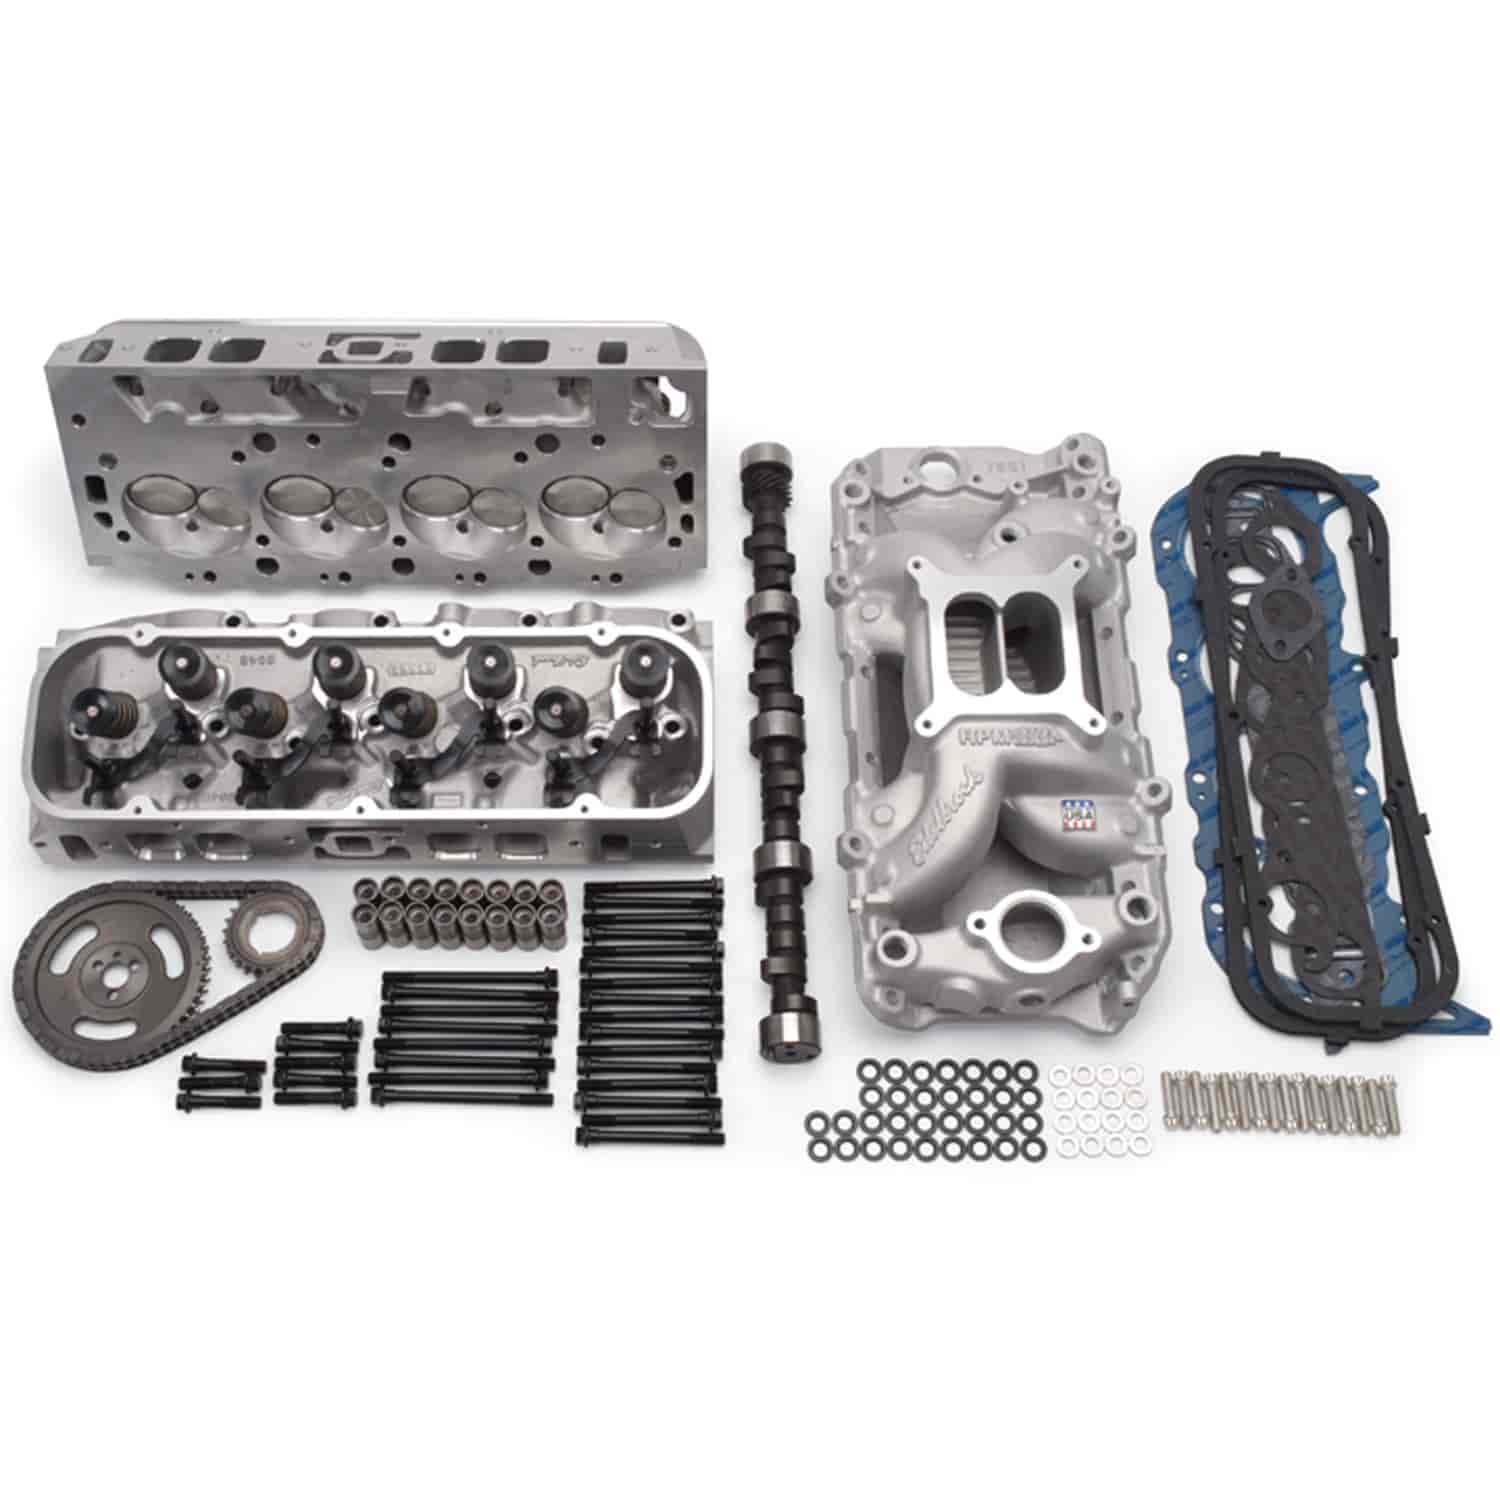 RPM Power Package Top End Kit for 1965-1995